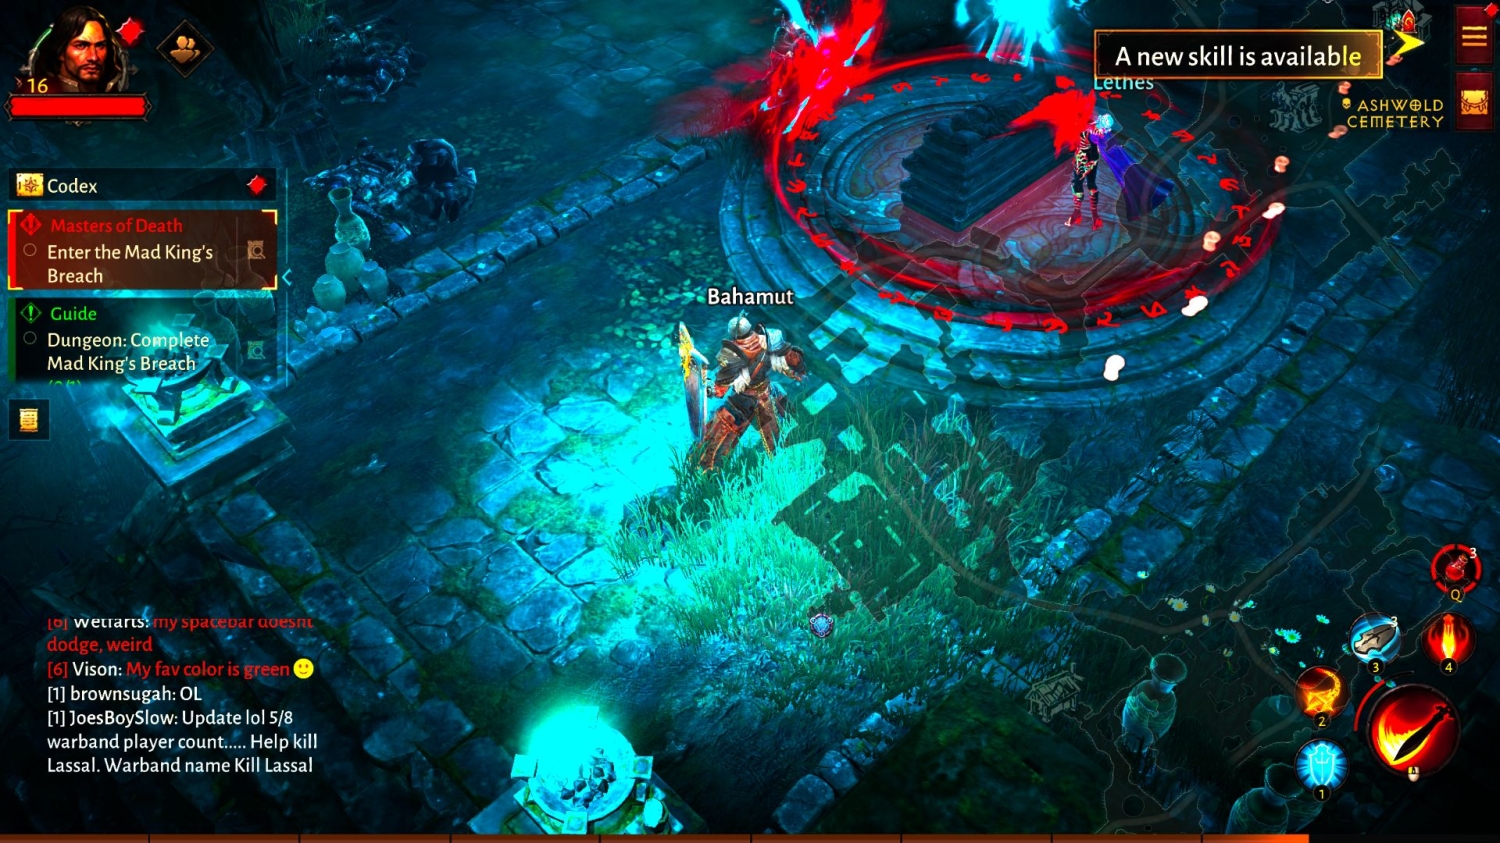 Not So Massively: First impressions of Diablo Immortal on PC